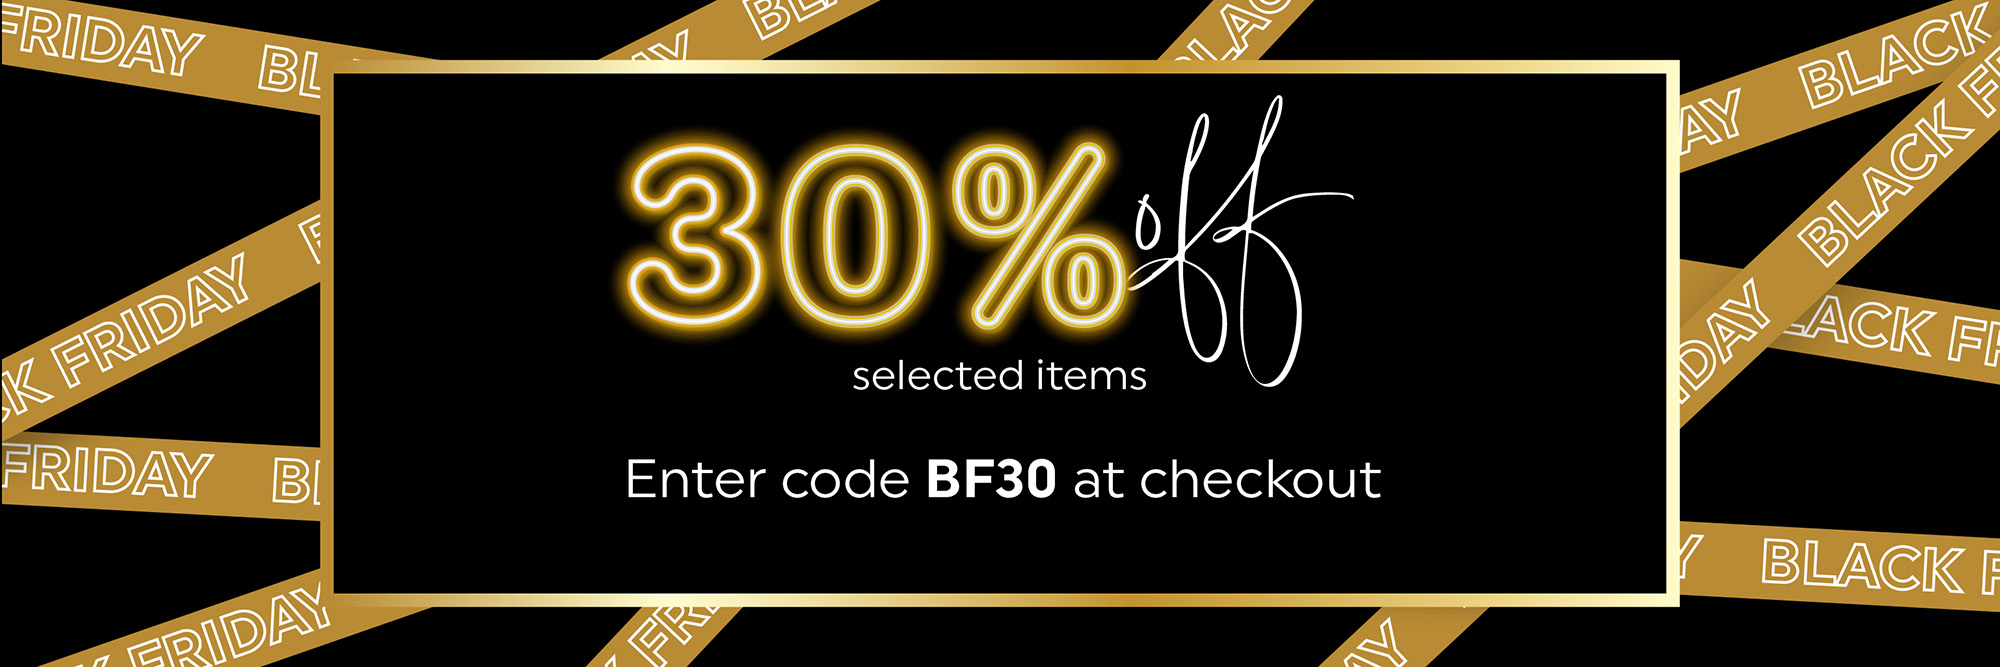 Save 30% off selected products in this category using promo code BF30